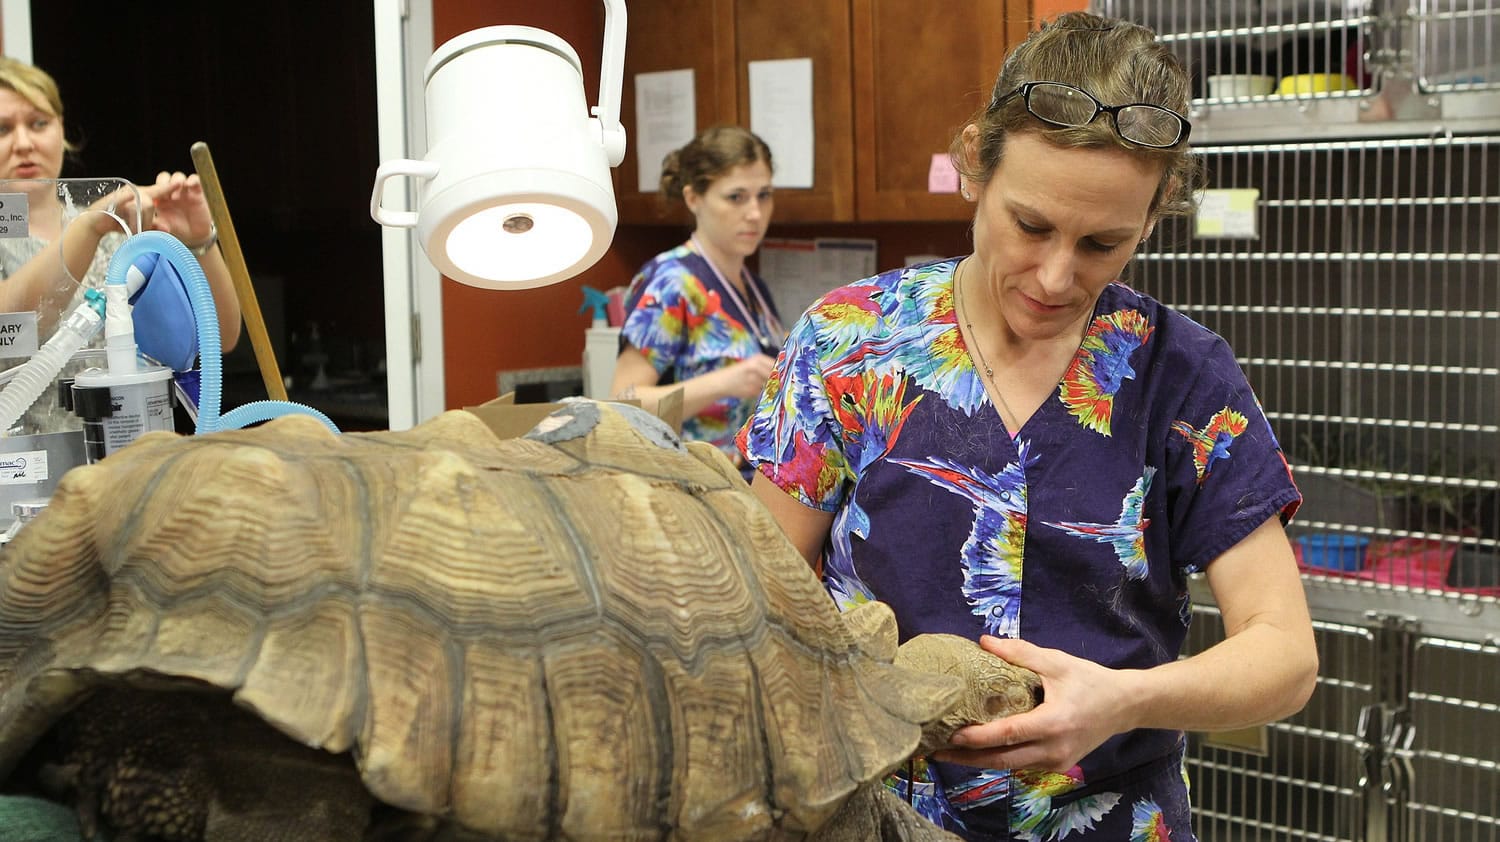 Michael Montero/National Geographic Channels
Dr. Susan Kelleher, also known as Dr. K, performs her initial physical assessment on Lady the tortoise.